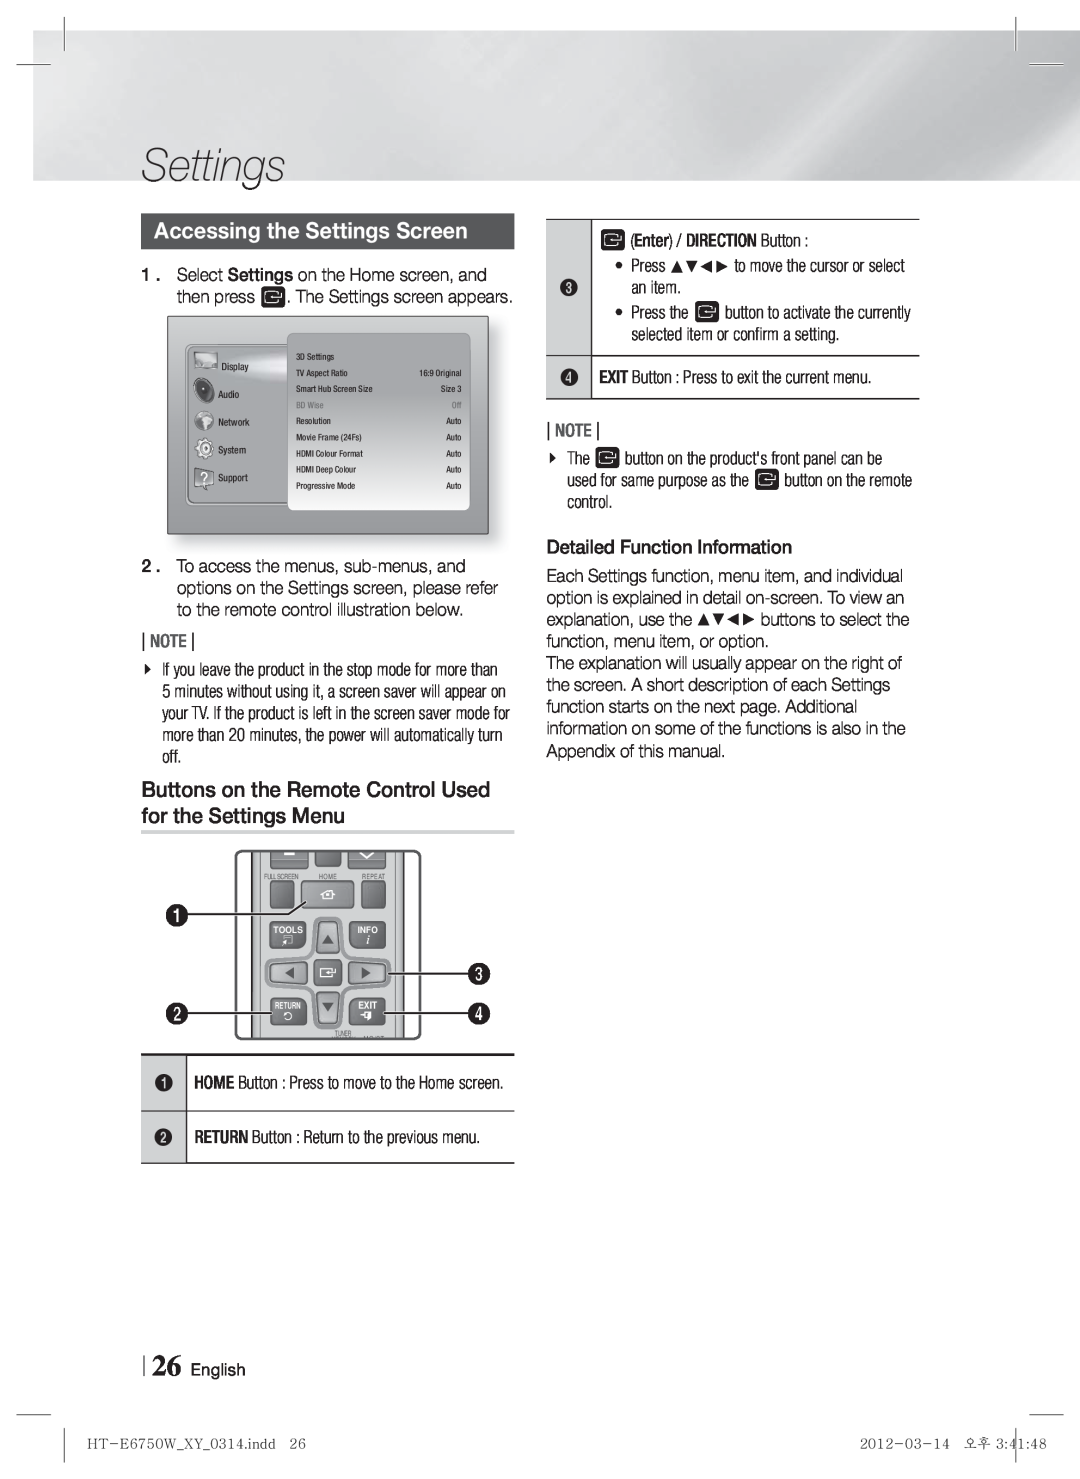 Samsung HT-E6750W user manual Accessing the Settings Screen, Note, 26 English 